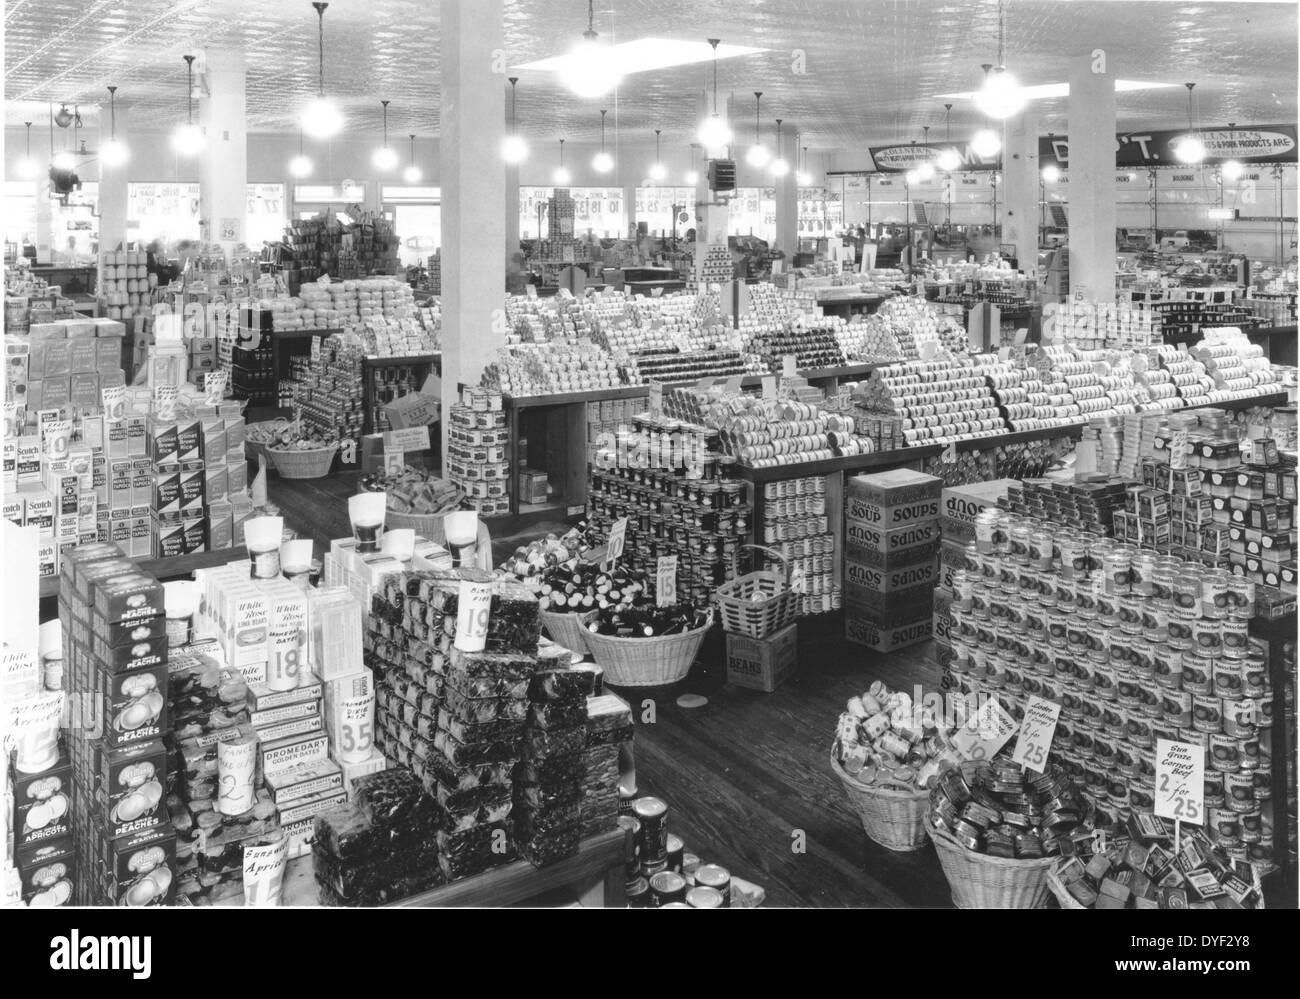 Photograph of a well stock shop in the USA 1920s. The sale of alcohol was prohibited throughout the US during the 1920's Prohibition. As the photograph shows there is a bountyful amount of food produce but no alcohol on sale. Unknown Stock Photo